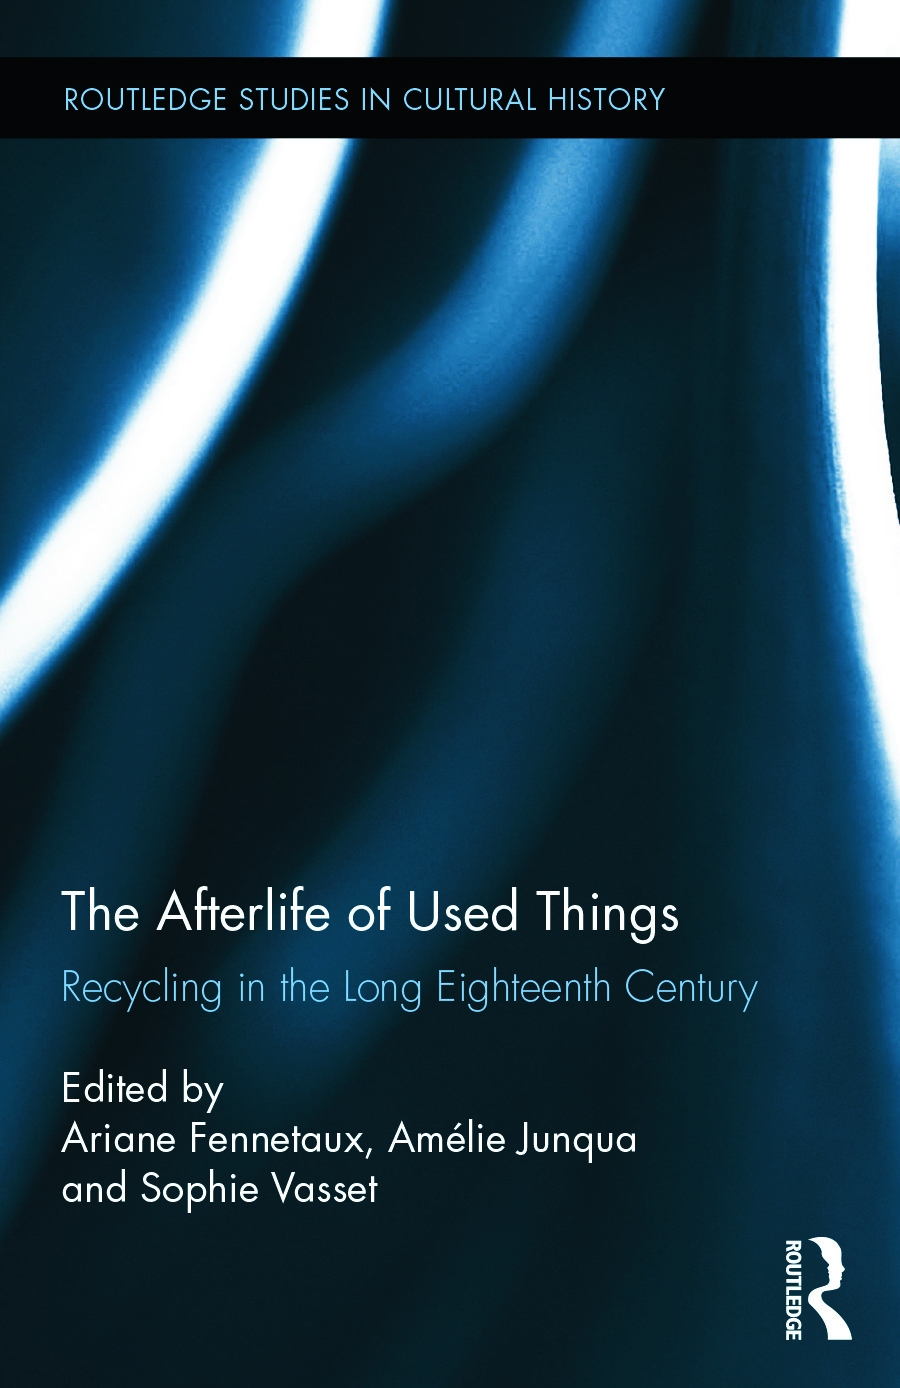 The Afterlife of Used Things: Recycling in the Long Eighteenth Century